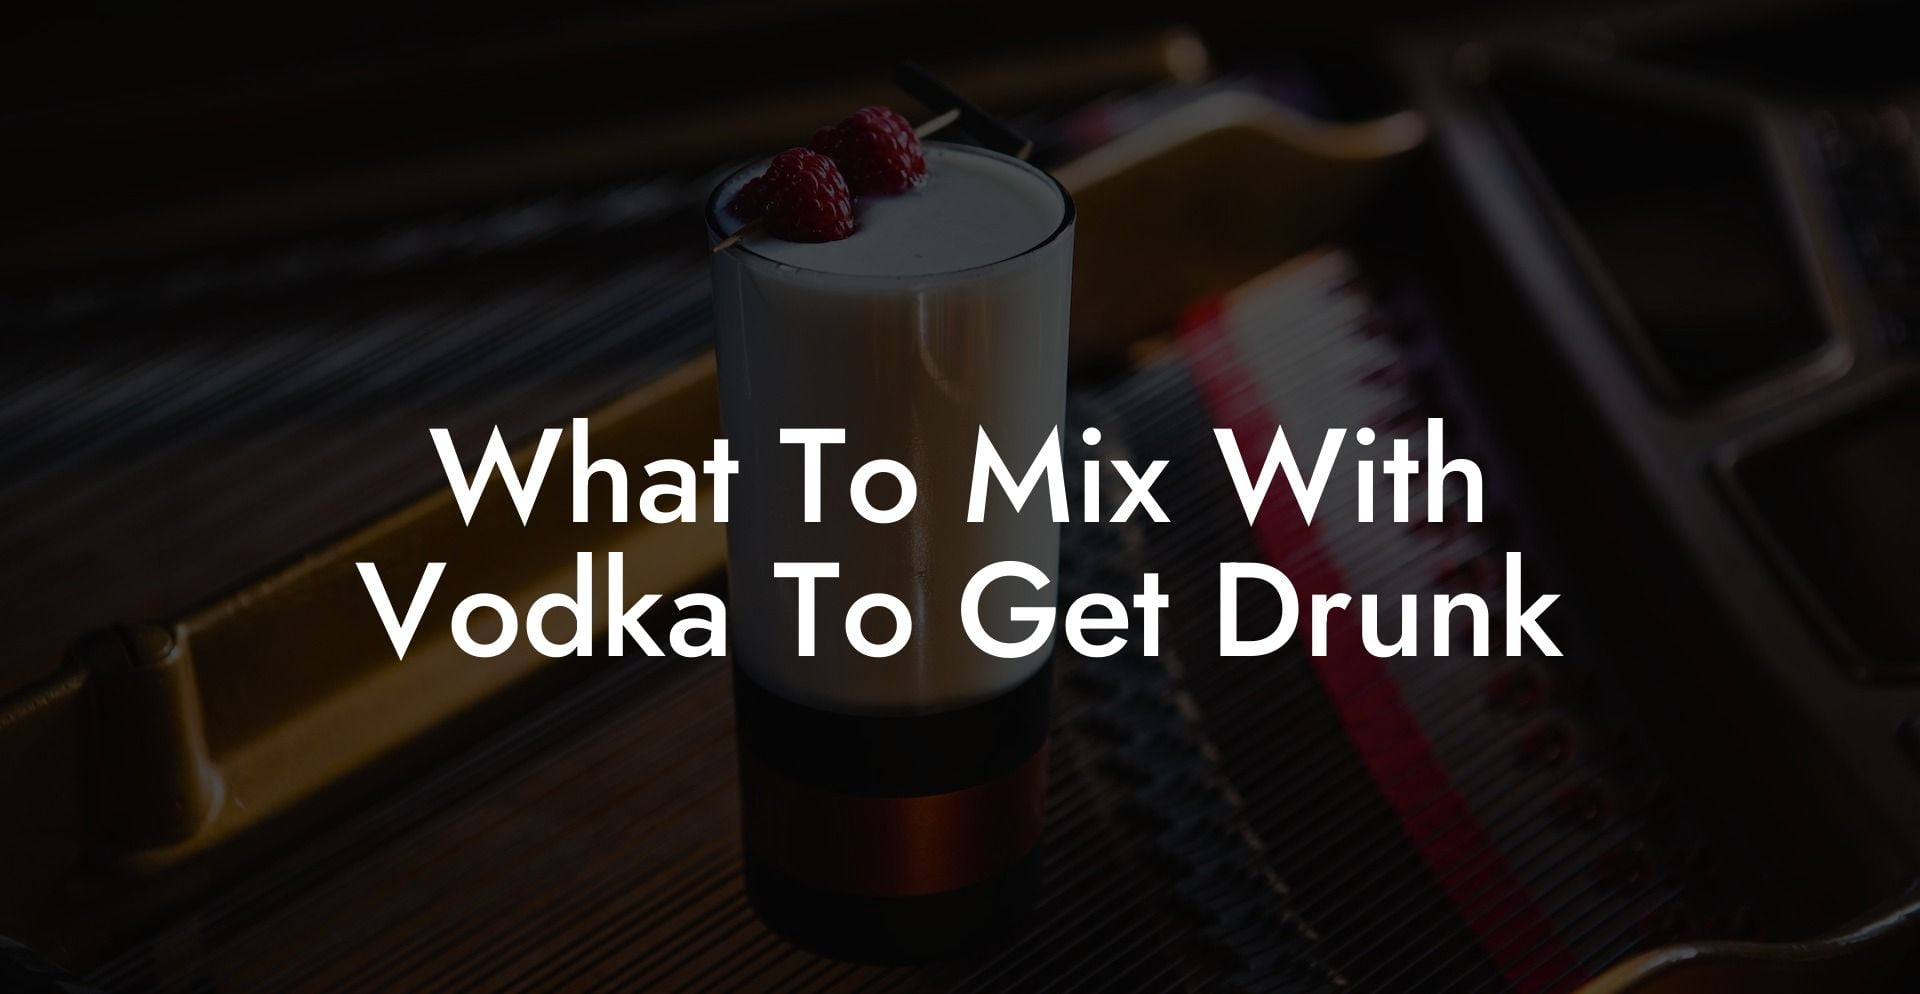 What To Mix With Vodka To Get Drunk